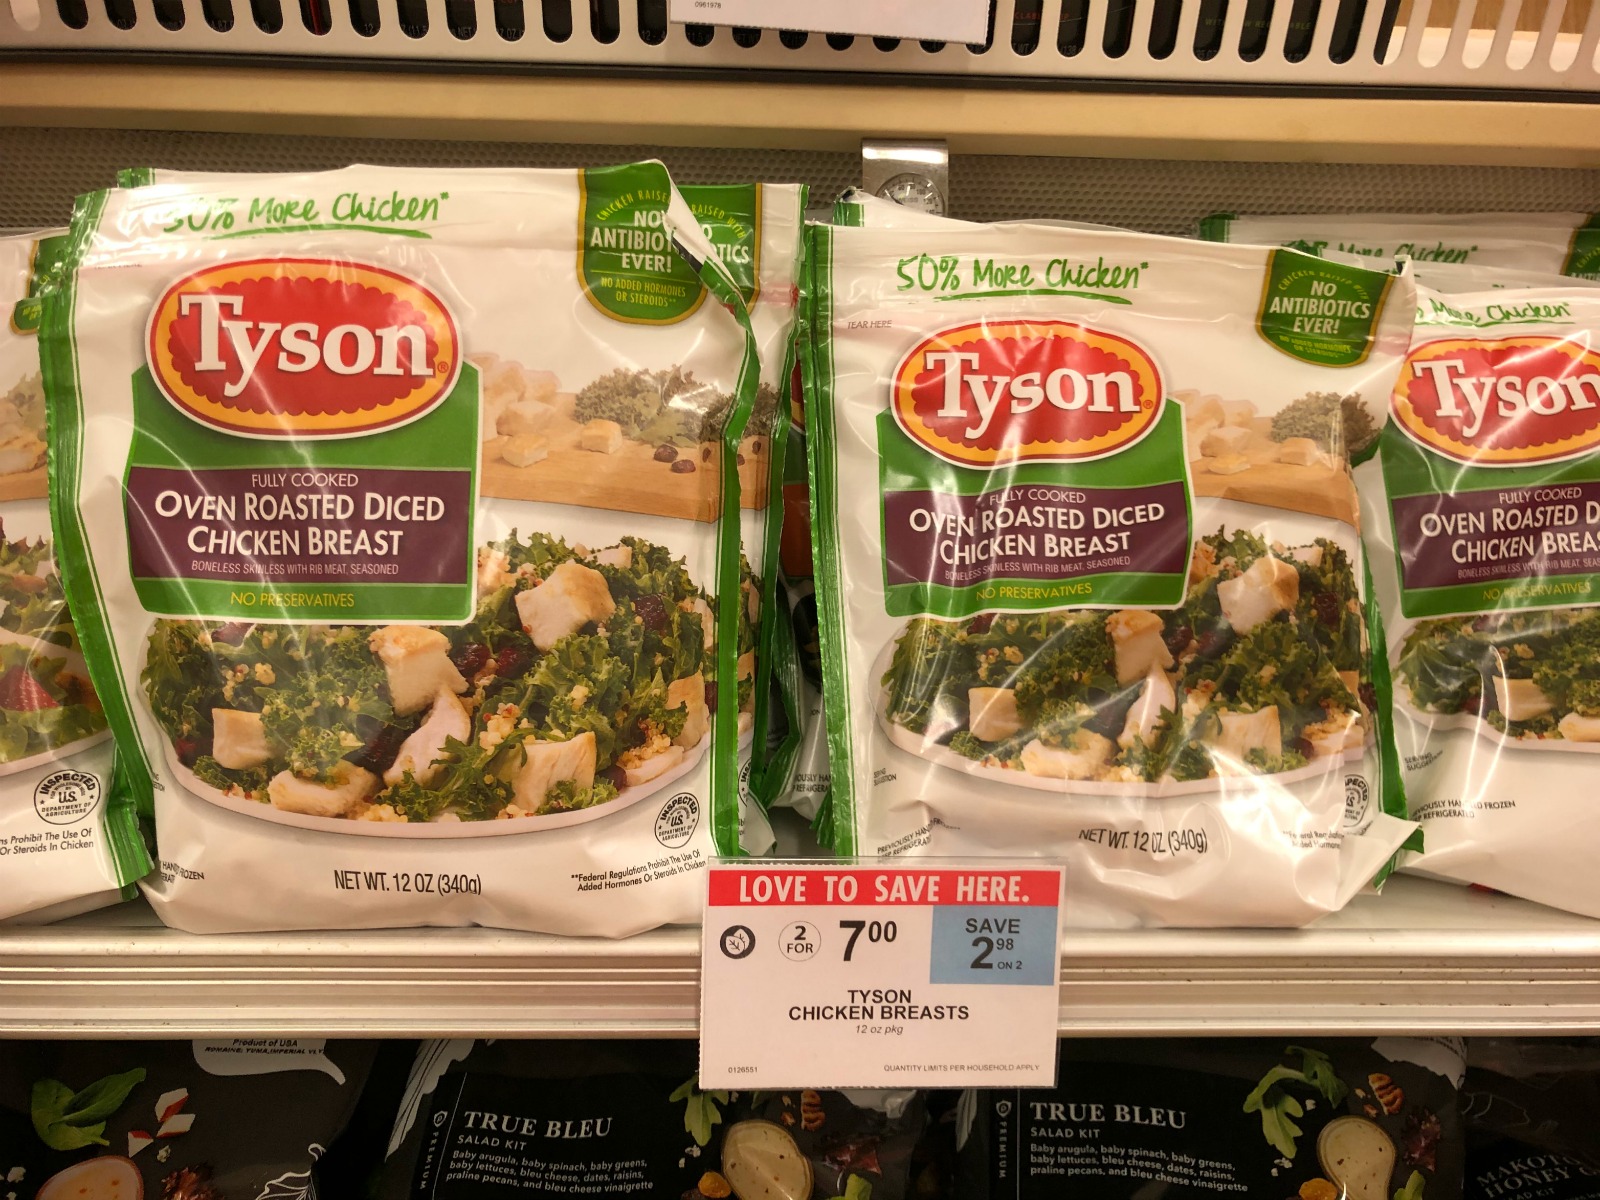 Last Chance To Save On Hillshire Farm® Lunchmeat & Tyson® Refrigerated Fully Cooked Chicken - Try My Turkey Club Salad on I Heart Publix